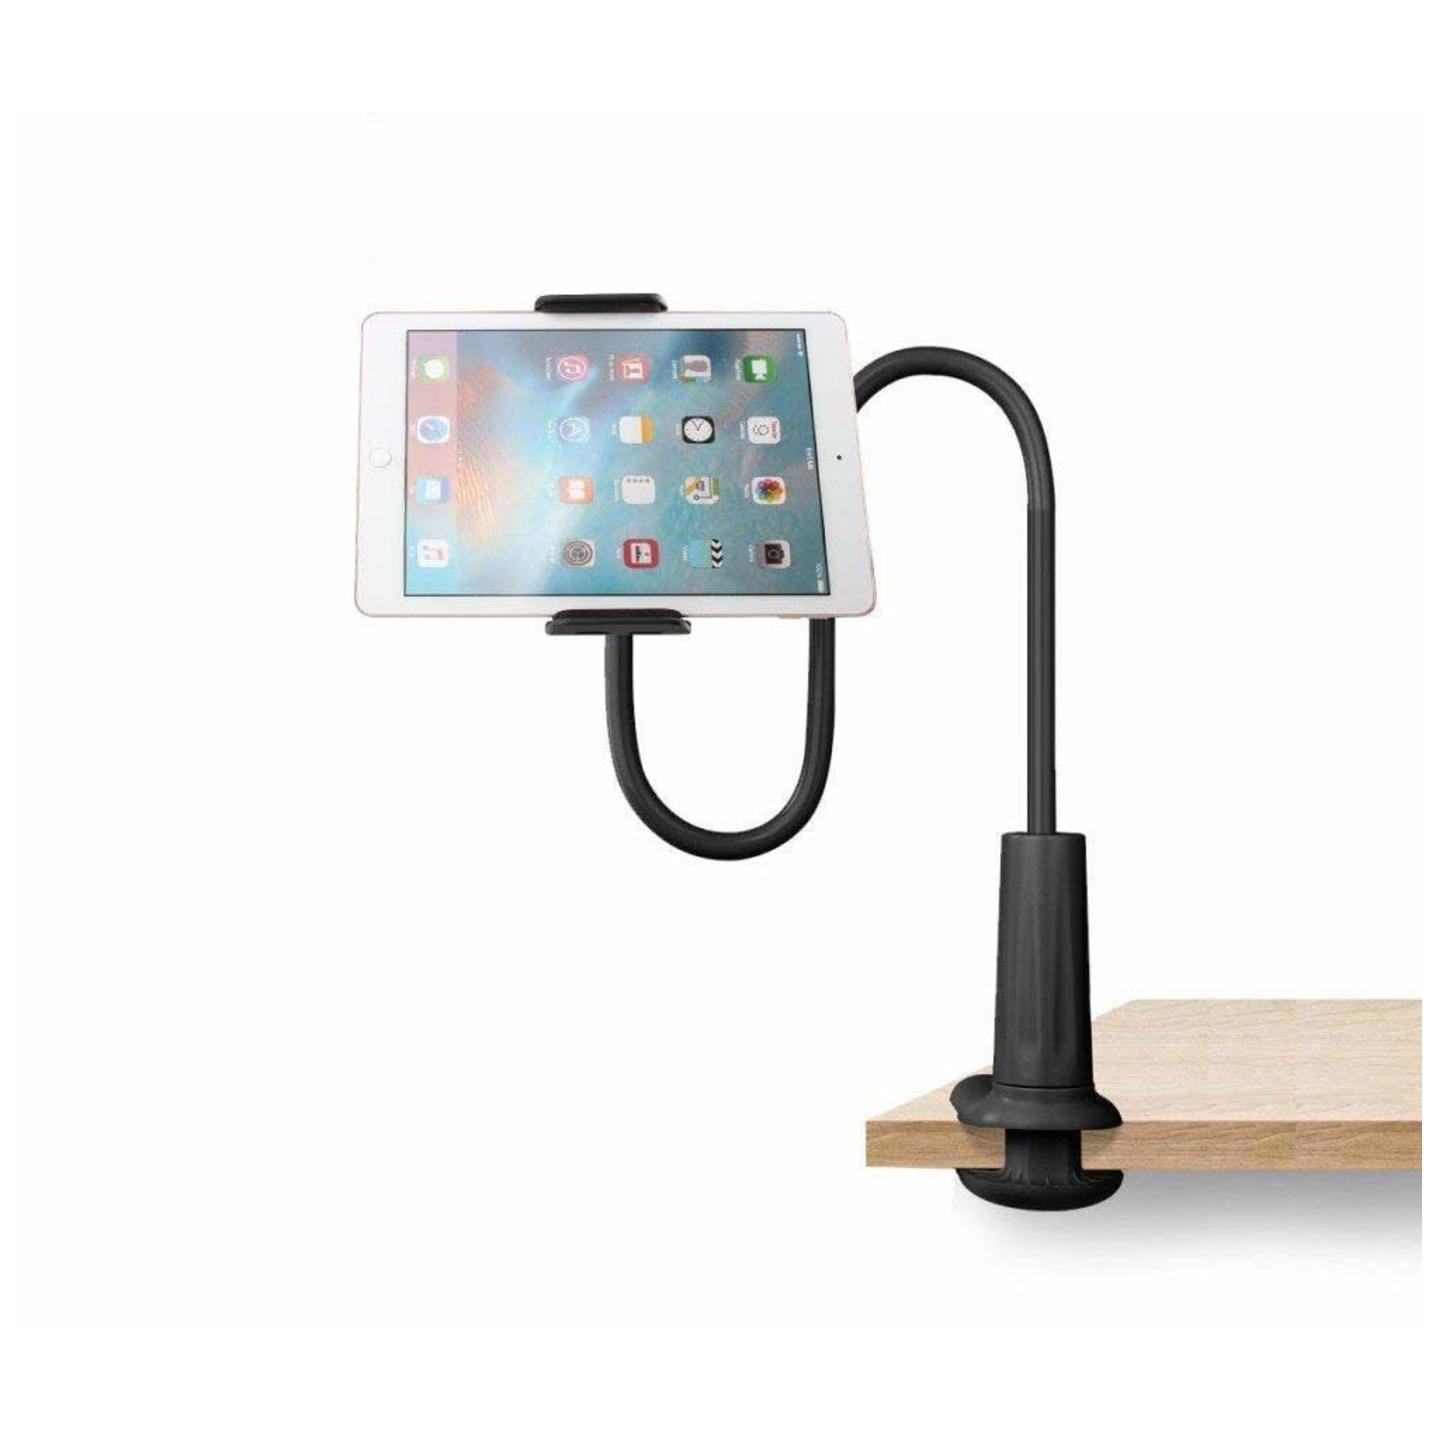 Flexible Clip Lazy Arm Bracket for Both Mobiles and TabletsipadKindle